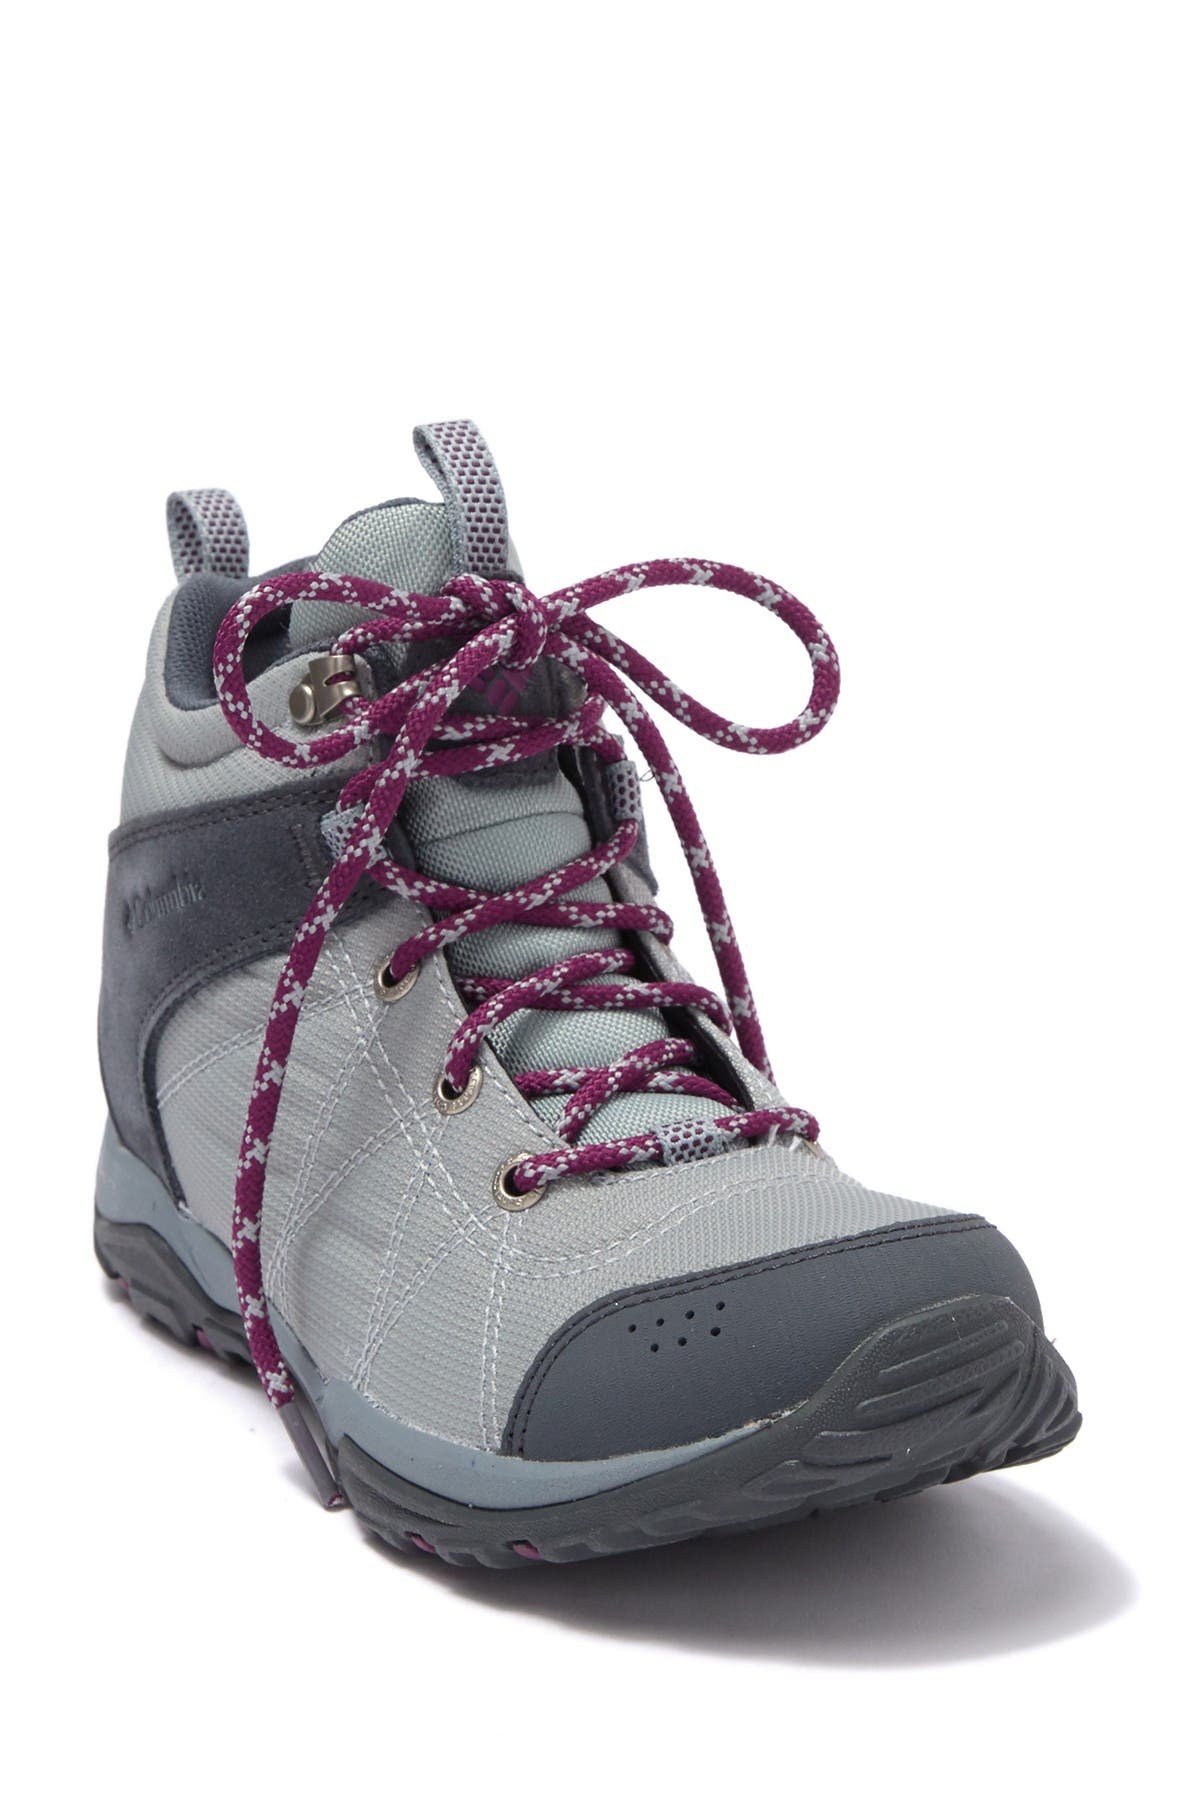 columbia fire venture mid hiking boot reviews